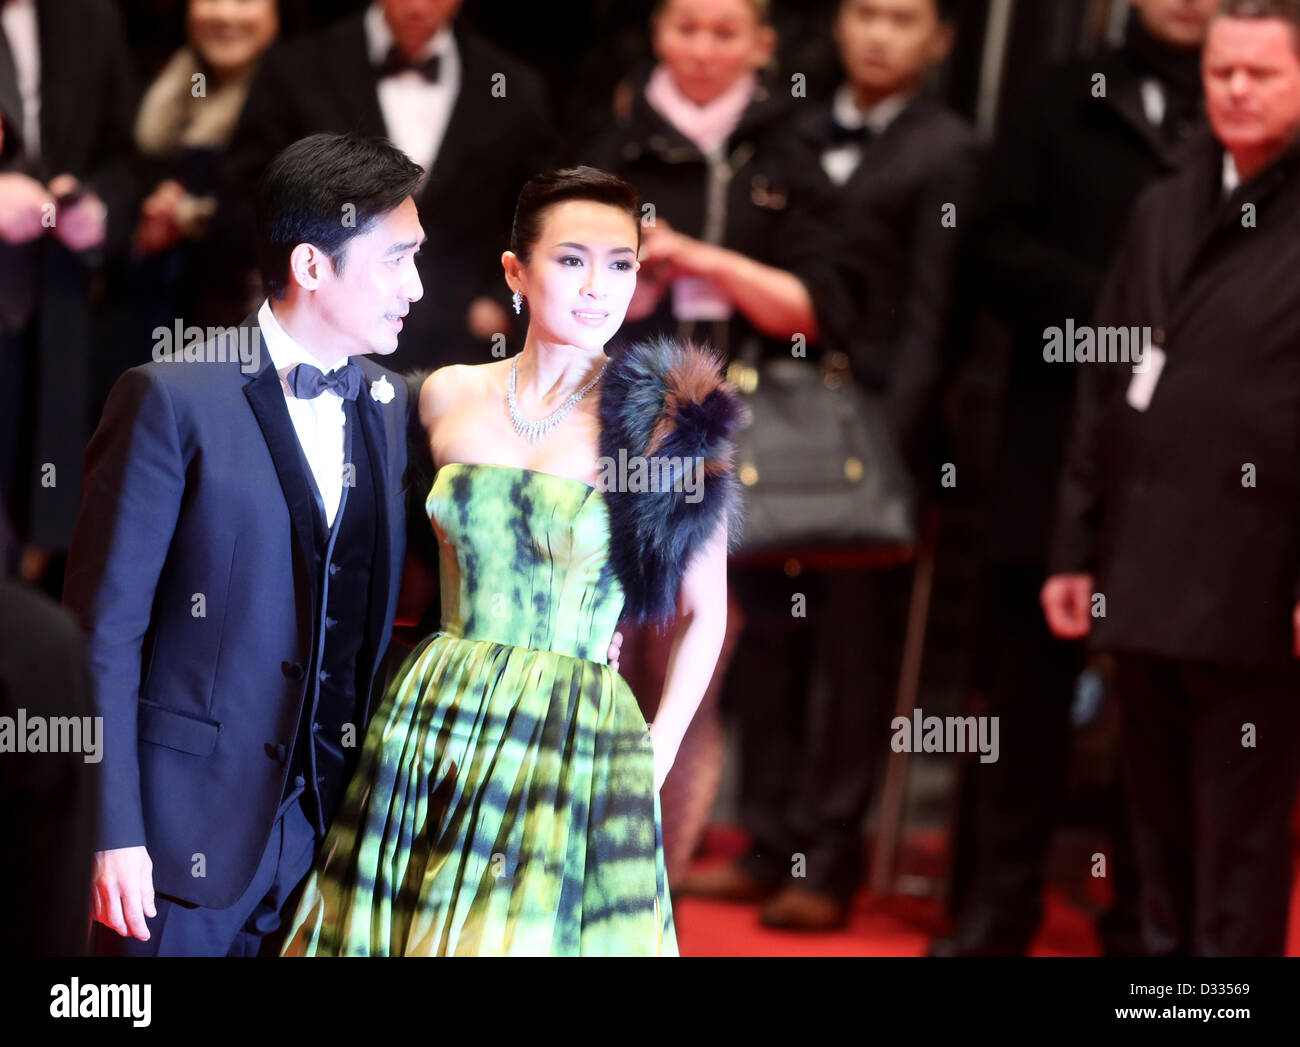 Berlin, Germany. 7th February 2013. Chinese actors Zhang Ziyi (R) and Tony Leung Chiu Wai arrive for the premiere of the movie 'The Grandmaster' ('Yi dai zong shi') during the 63rd annual Berlin International Film Festival, in Berlin, Germany, 07 February 2013. The movie has been selected as the opening film for the Berlinale and is running in the offical section out of competion. Photo: Kay Nietfeld/dpa Stock Photo